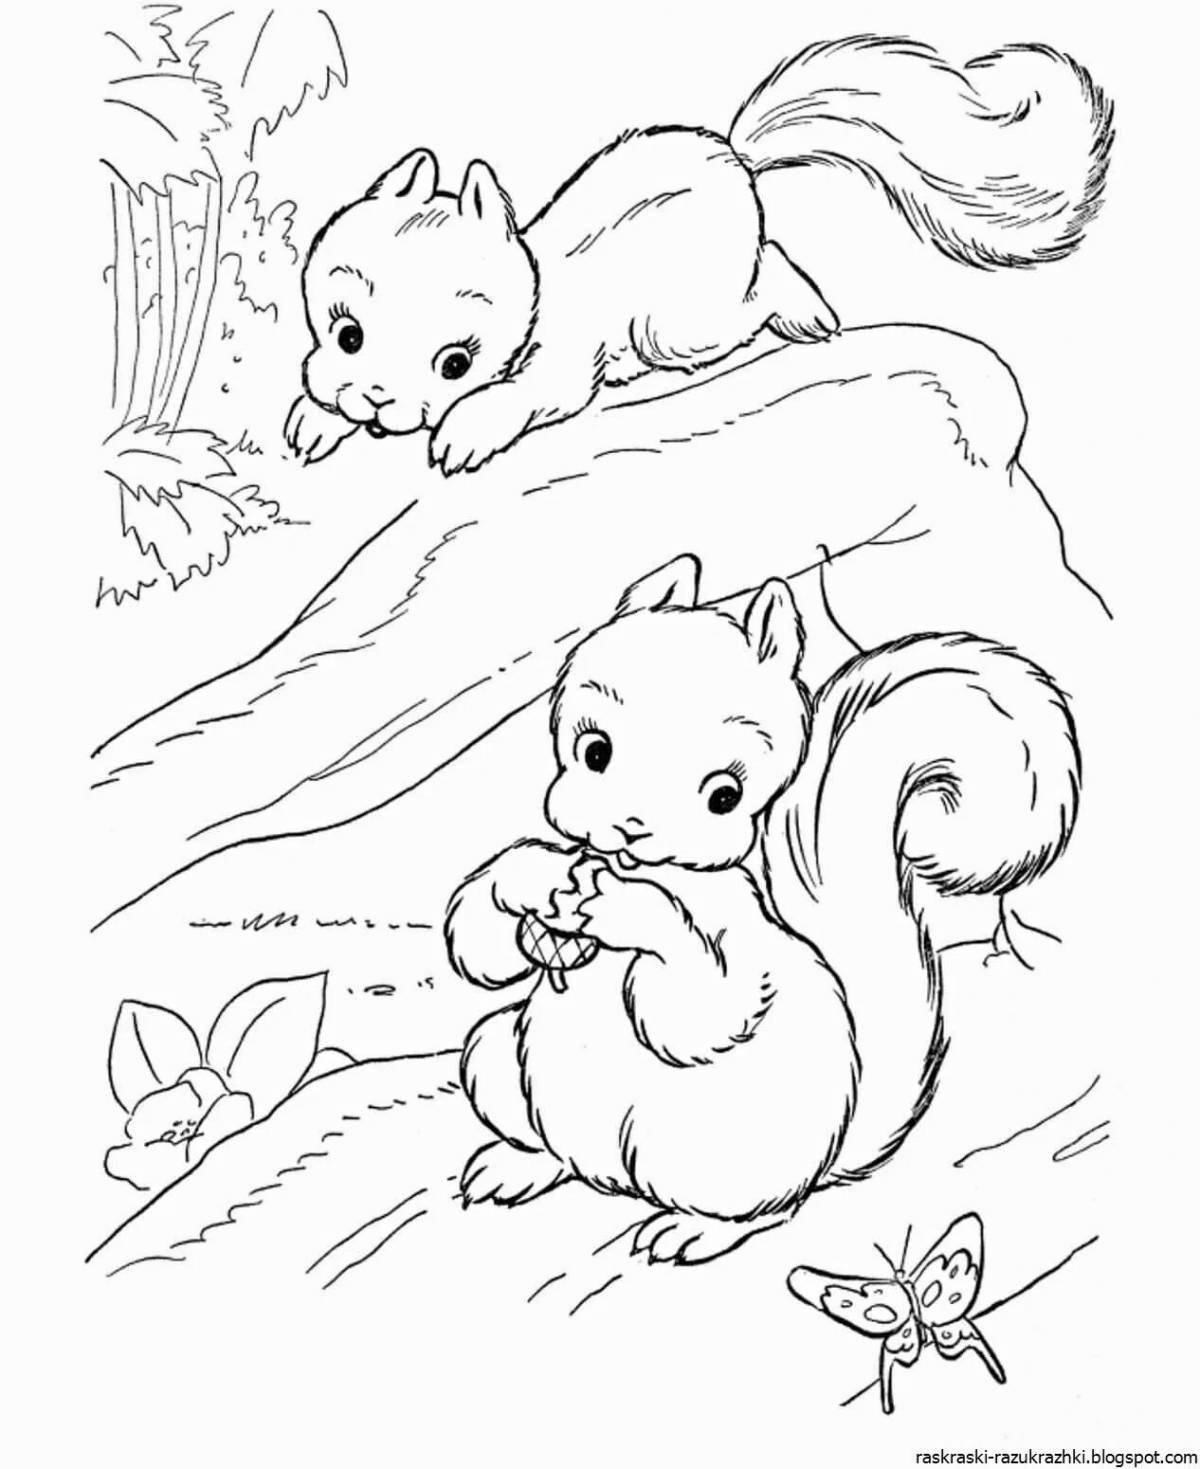 Fun animal coloring pages for girls